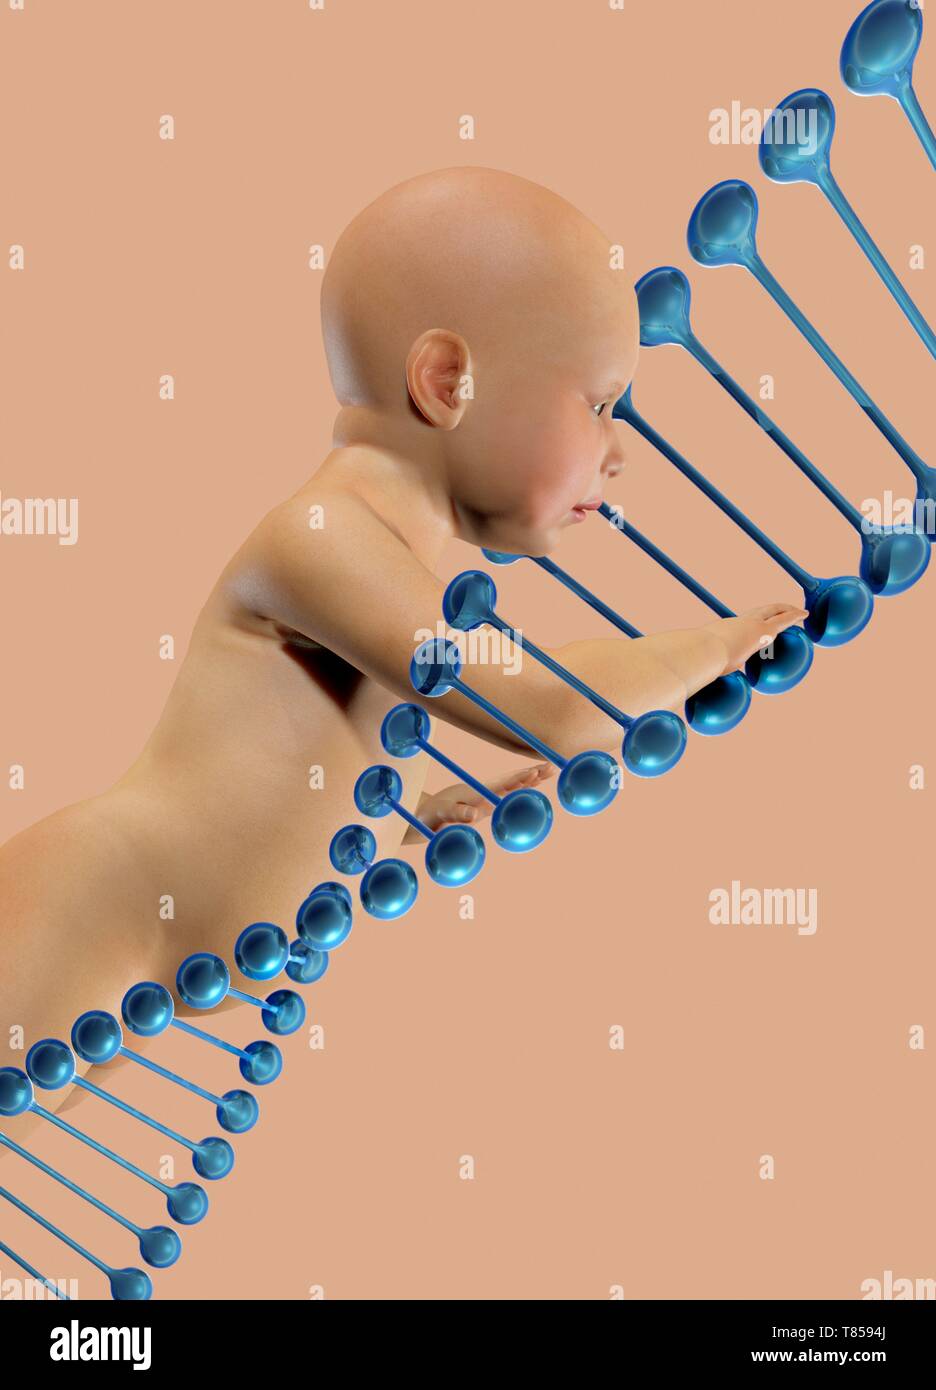 Baby and dna, illustration Stock Photo